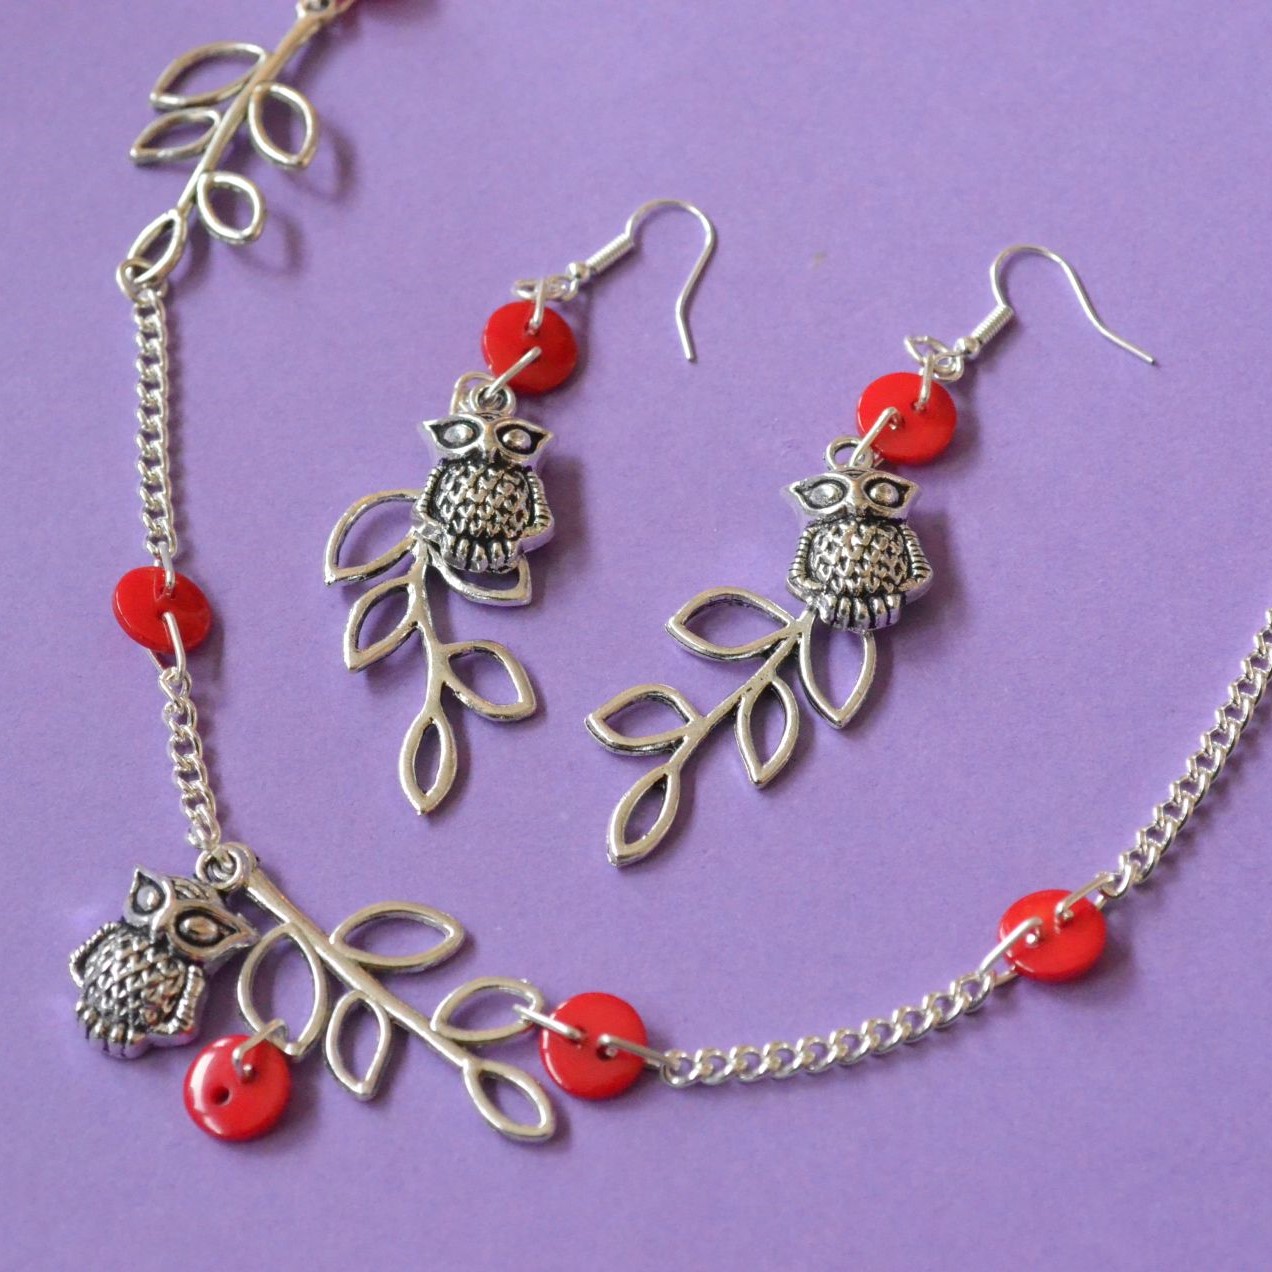 Red Owl & Leaves Necklace